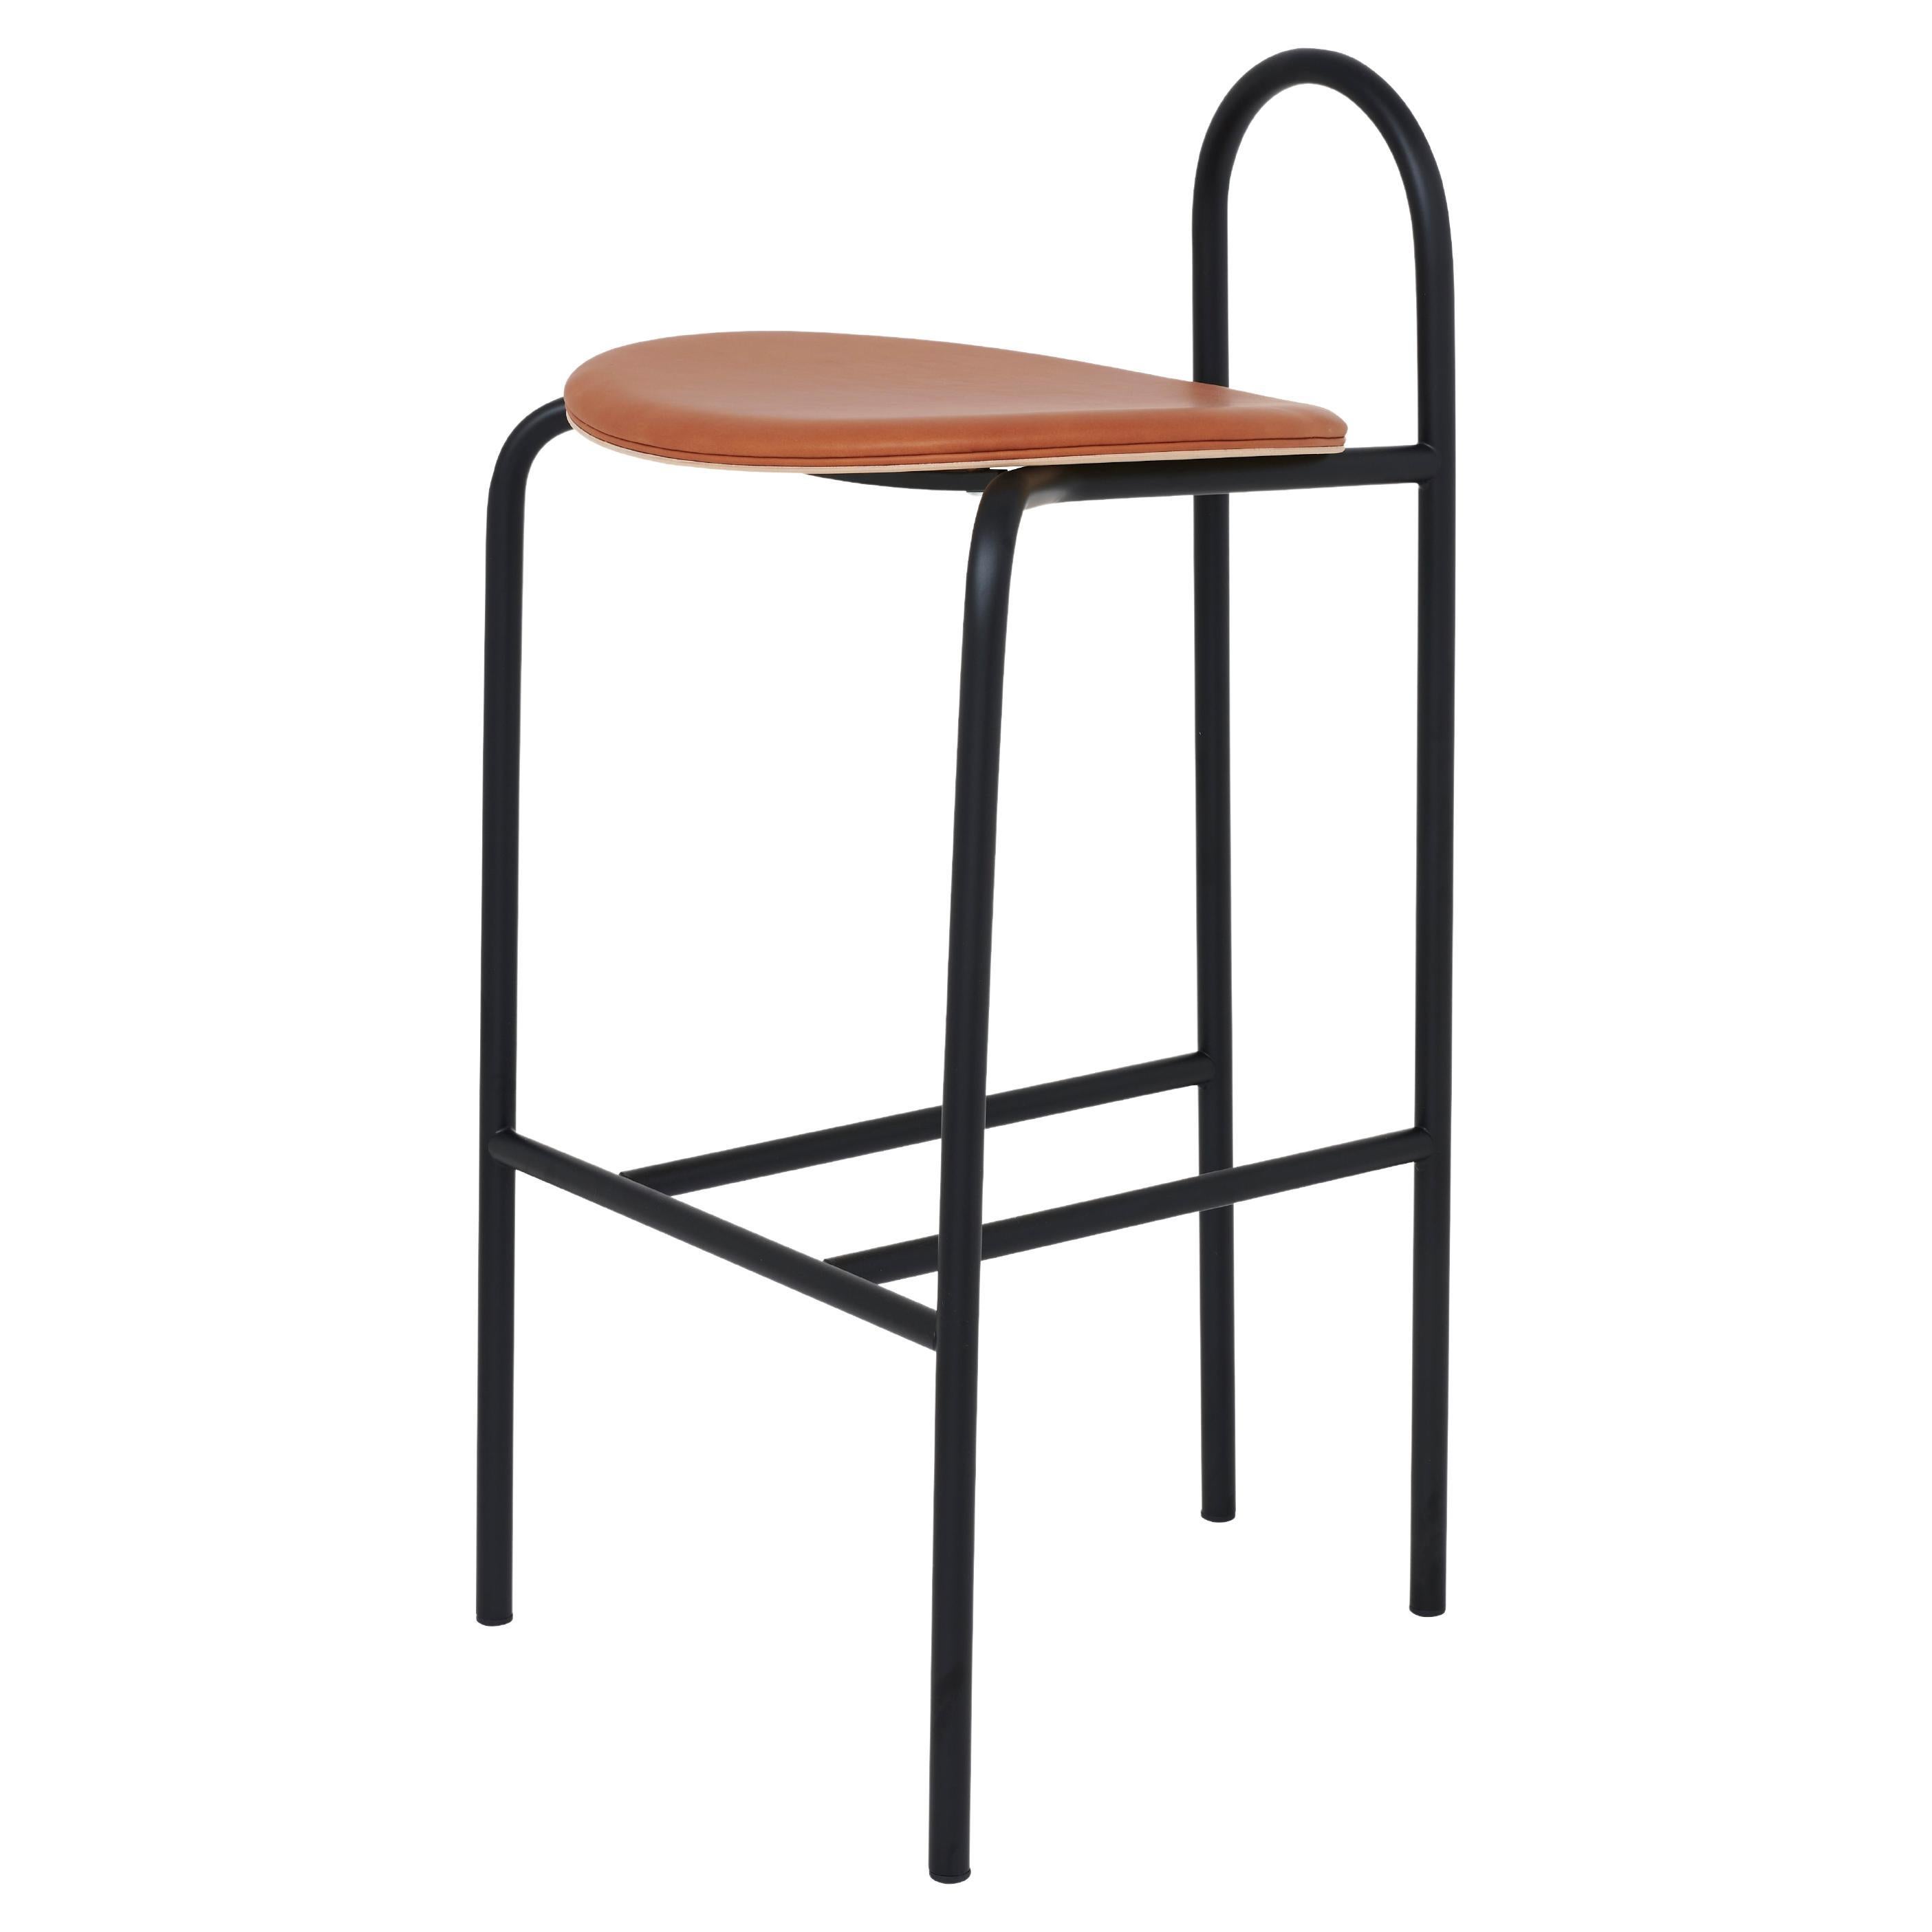 SP01 Michelle High Bar Stool in Edinburgh Cognac Leather, Made in Italy